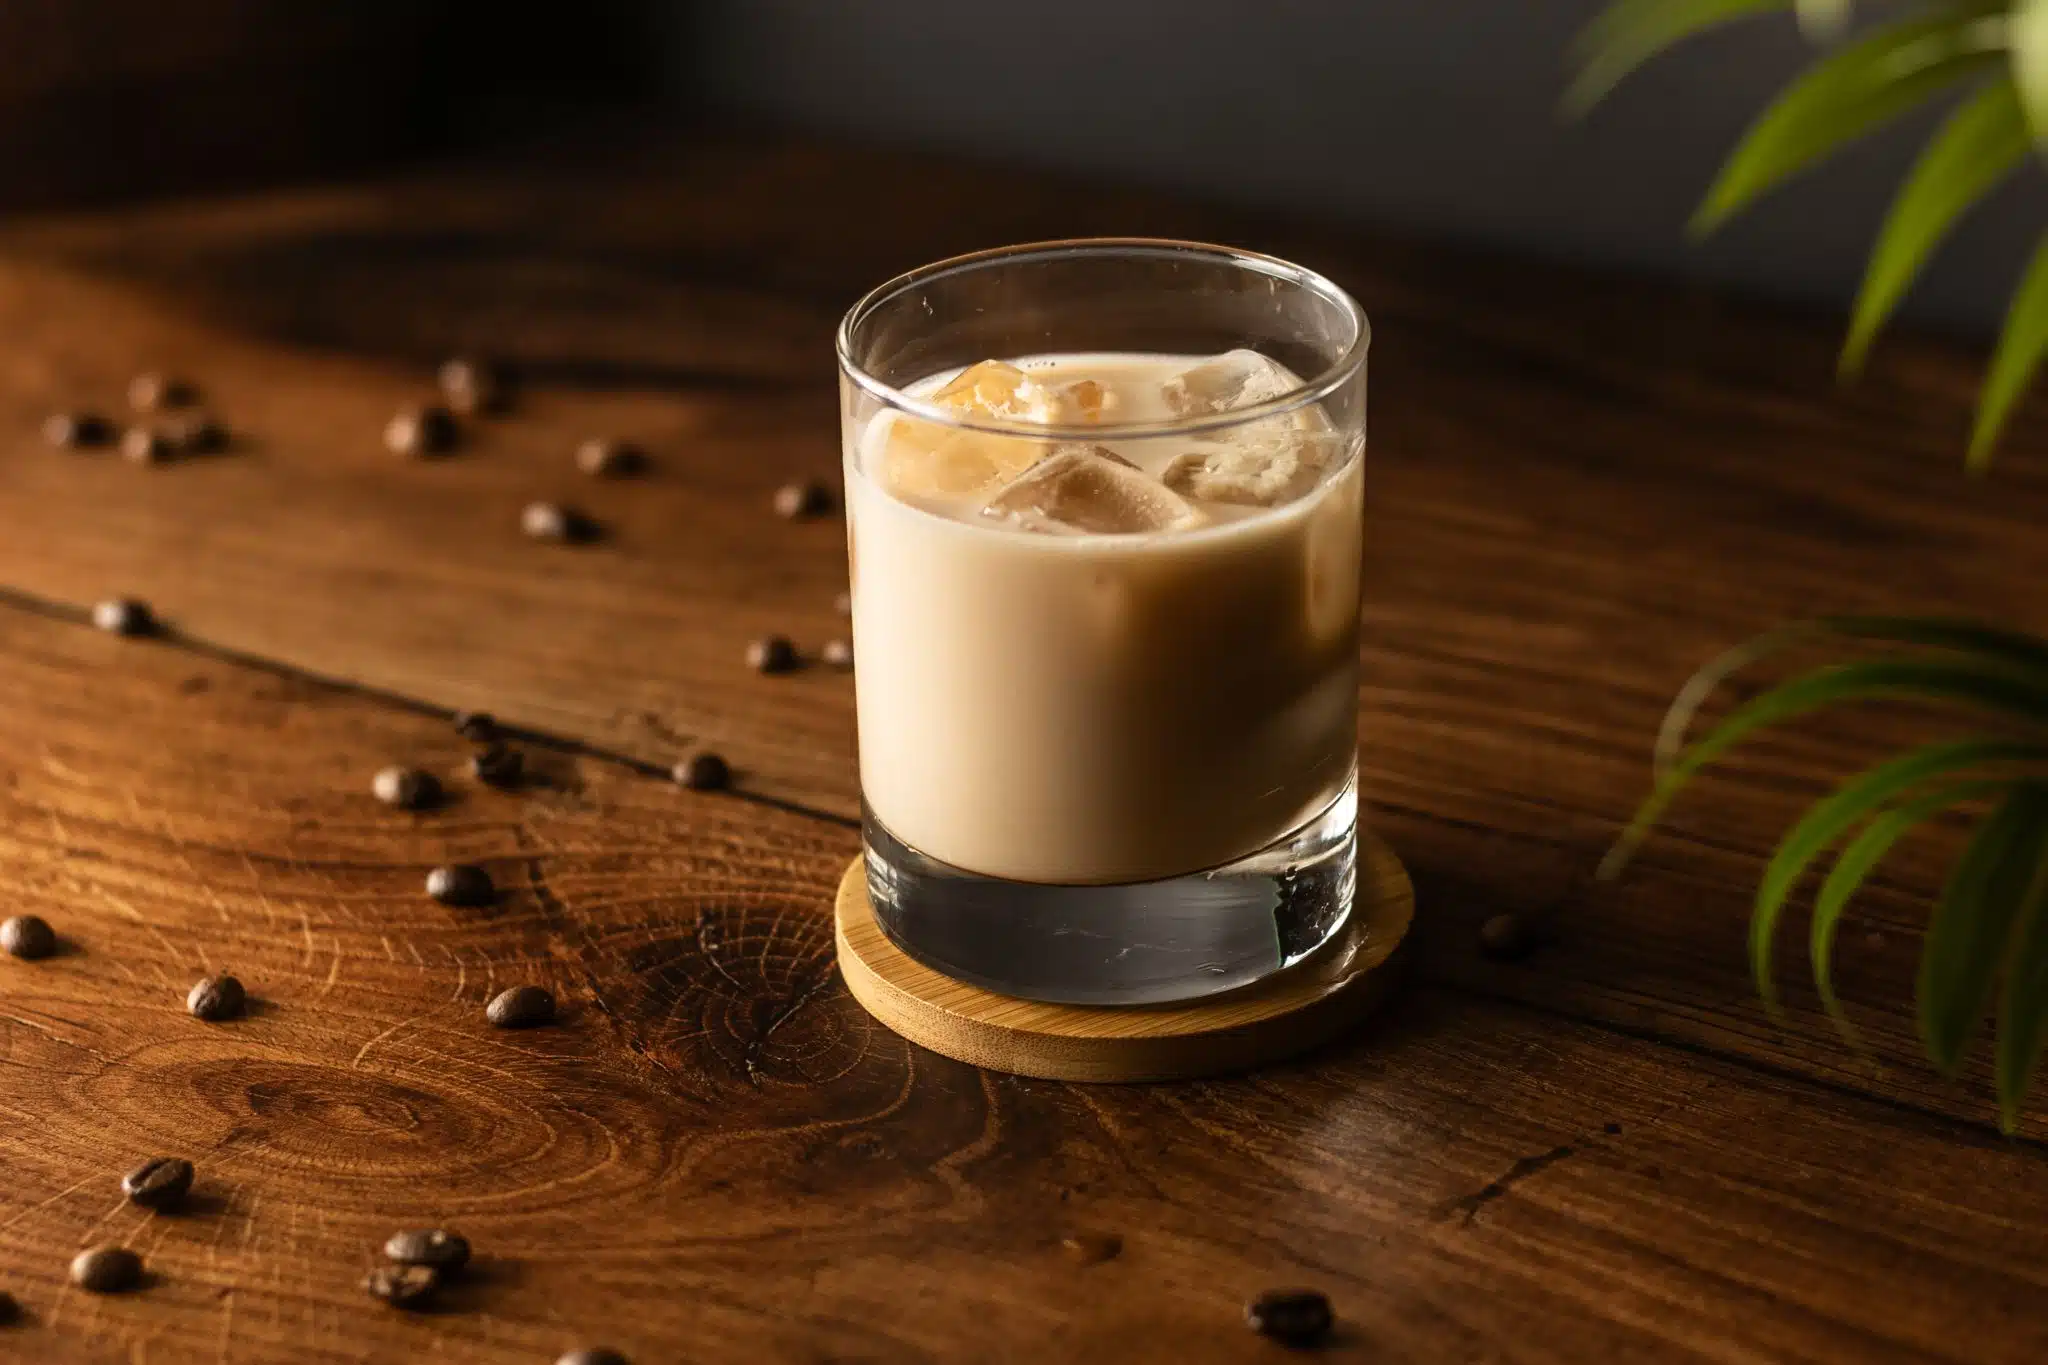 A side shot of a White Russian cocktail in an Old Fashioned glass on a wooden background